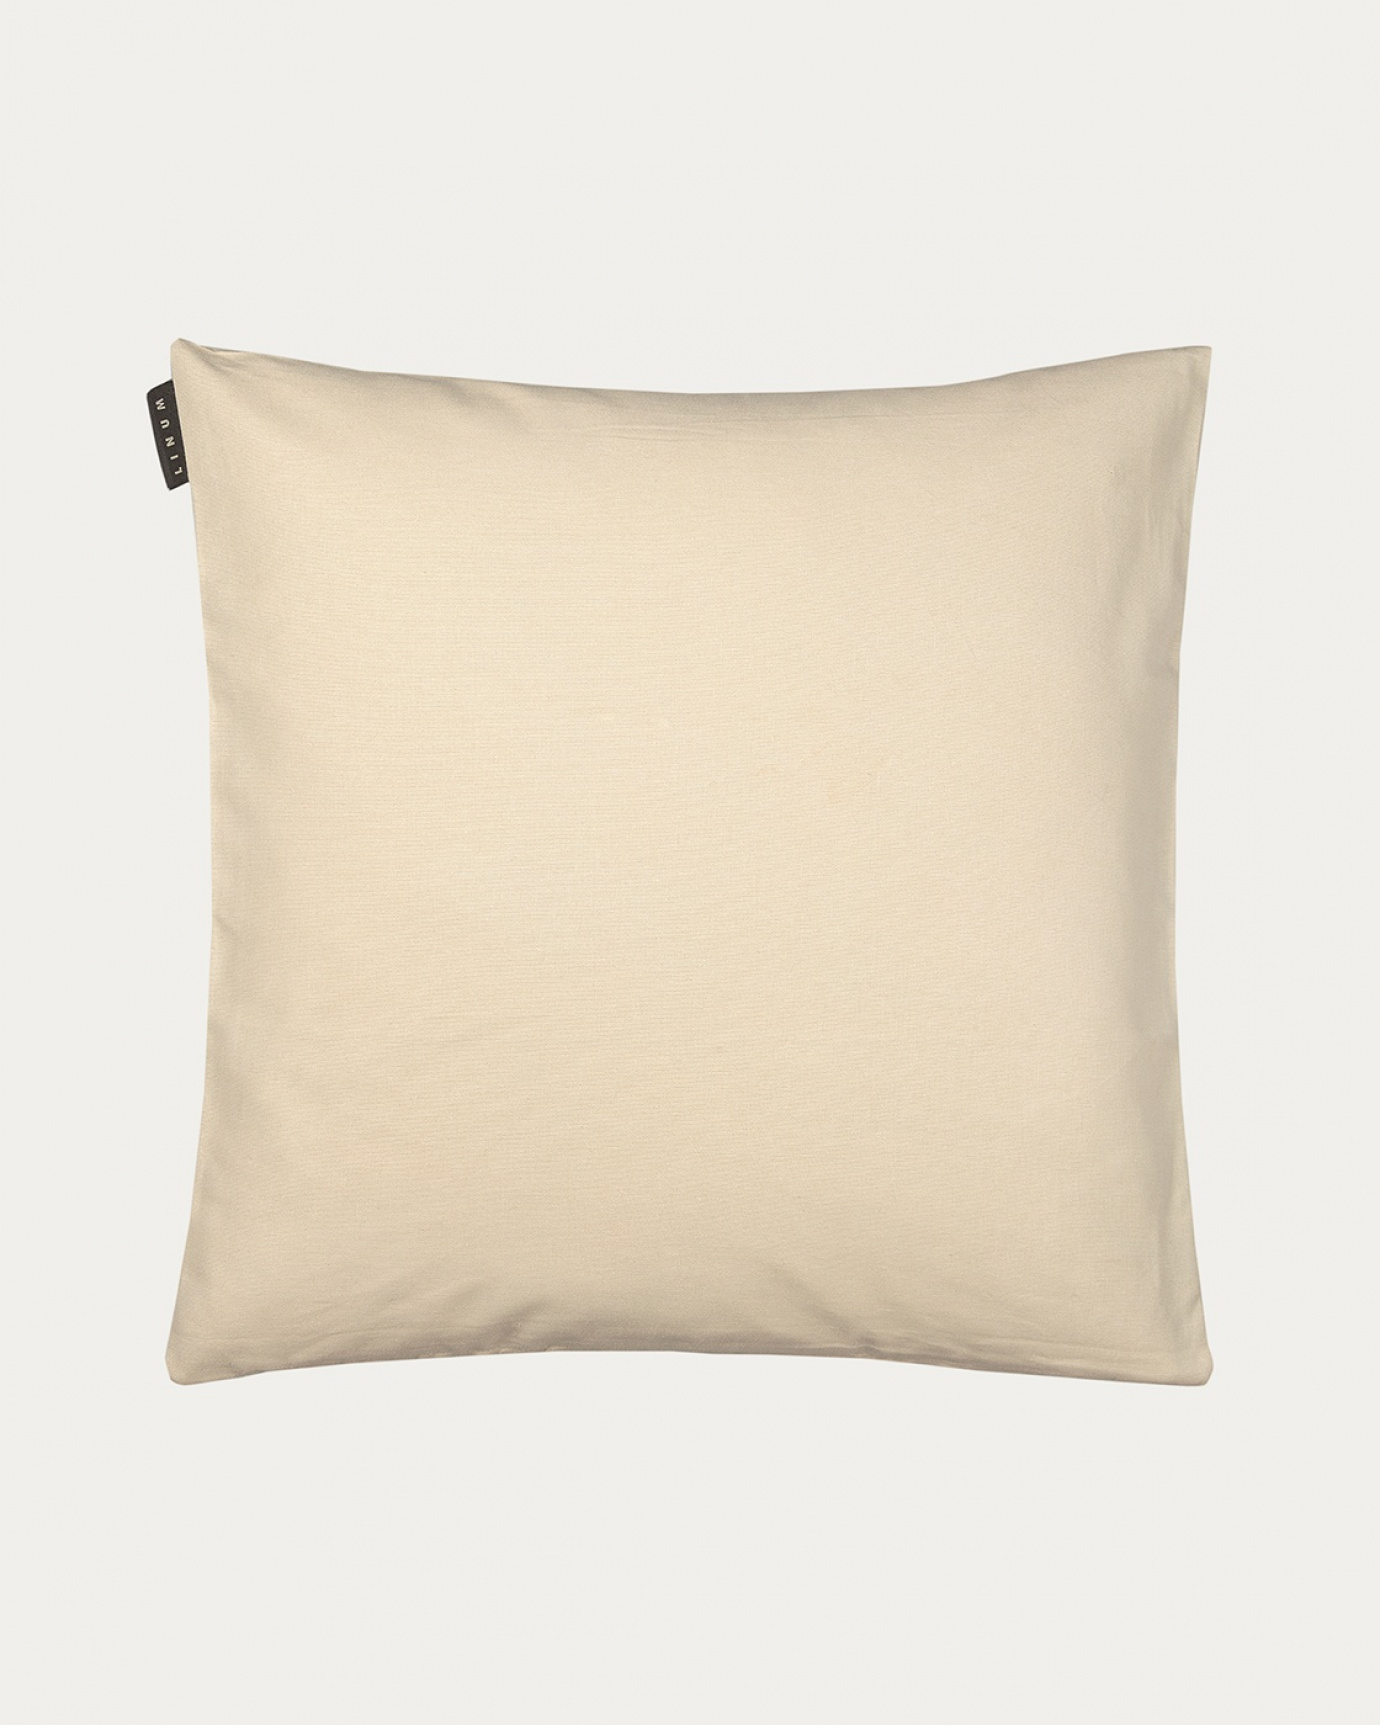 Product image warm beige ANNABELL cushion cover made of soft cotton from LINUM DESIGN. Size 50x50 cm.